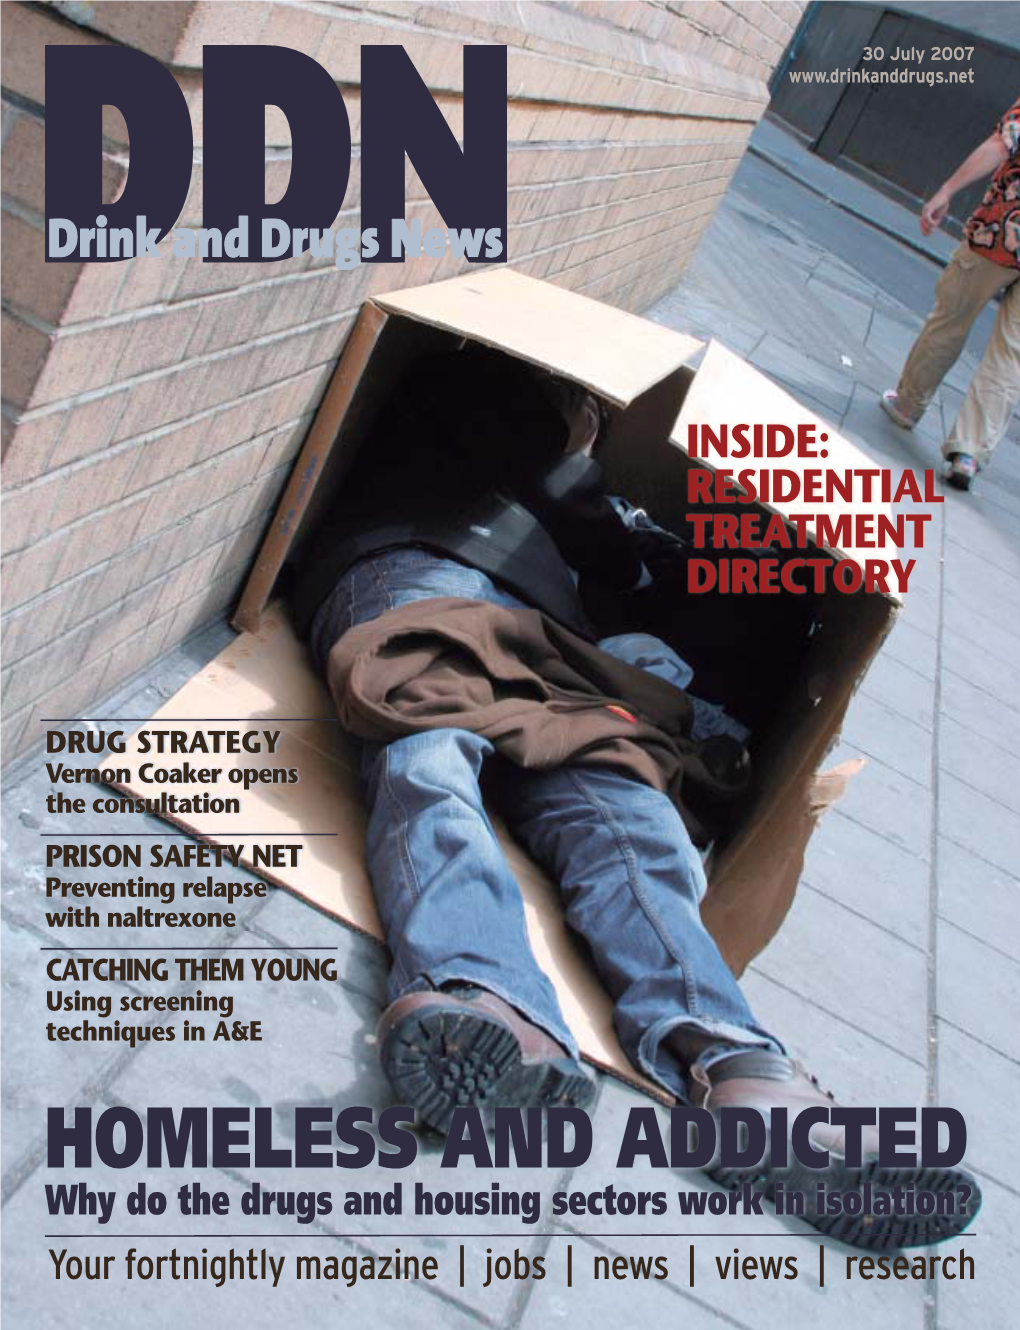 HOMELESS and ADDICTED Why Do the Drugs and Housing Sectors Work in Isolation? Your Fortnightly Magazine | Jobs | News | Views | Research